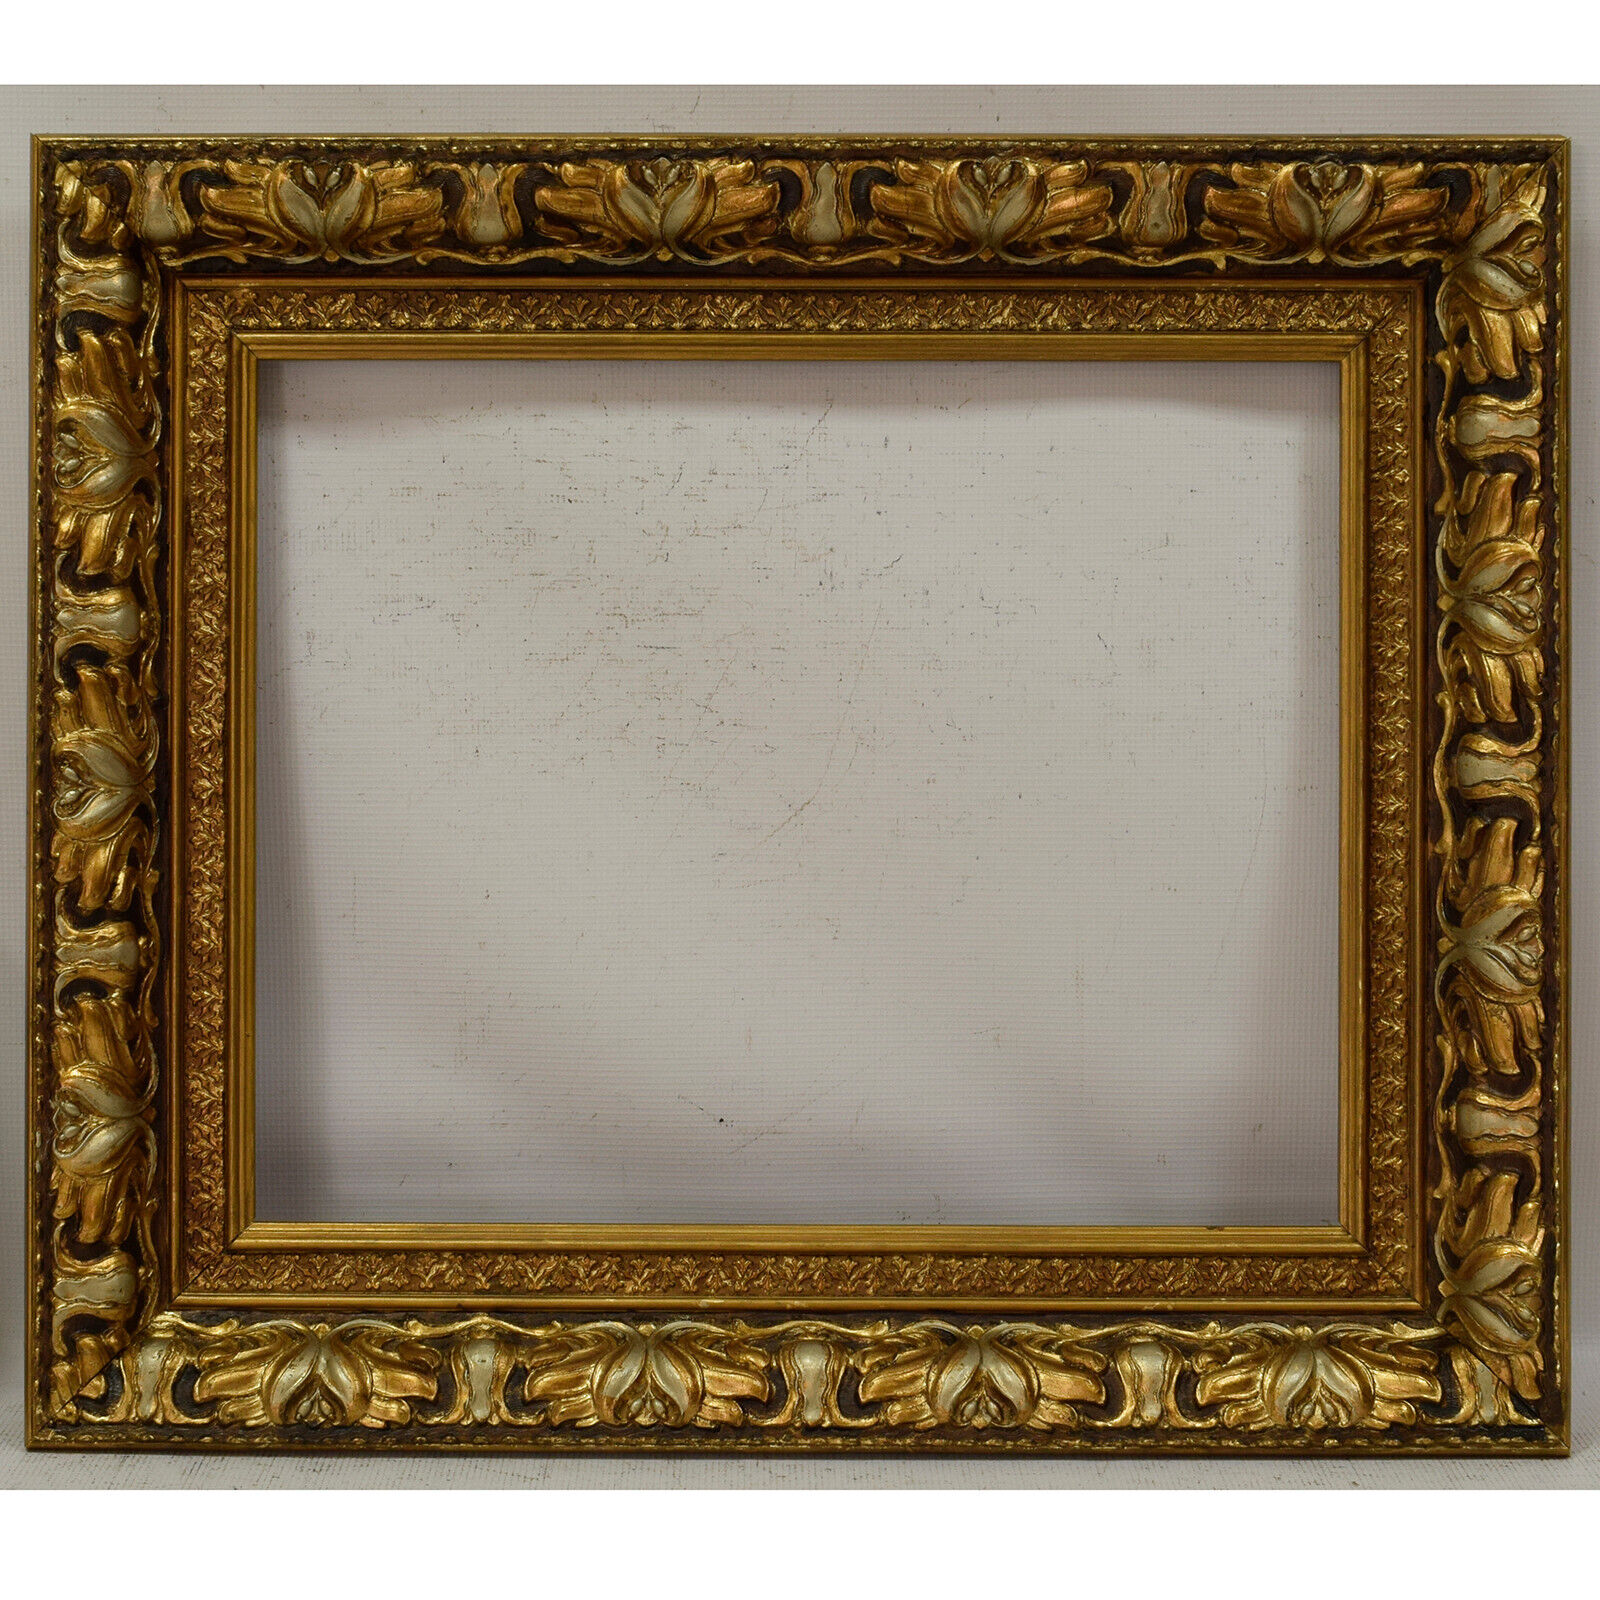 Ca 1920-1940 Old wooden frame decorative with metal leaf Internal: 19,6x15,7 in